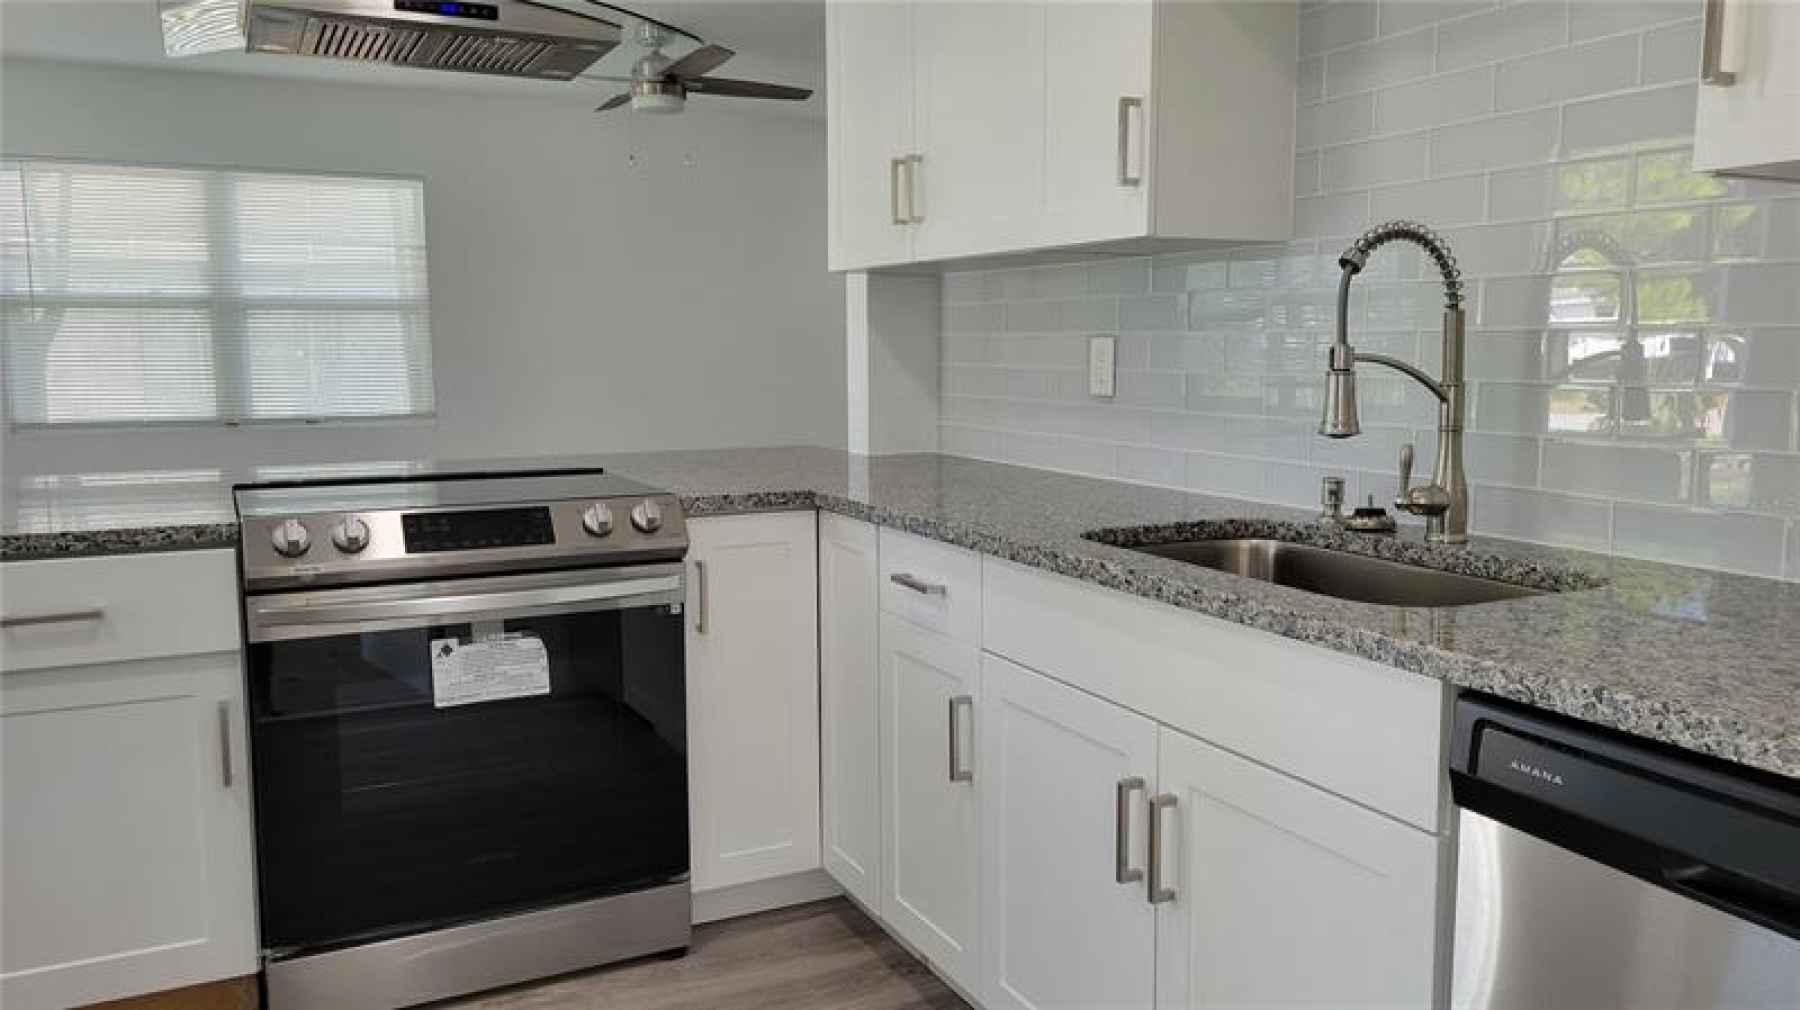 White Shaker cabinets with stainless steel appliances